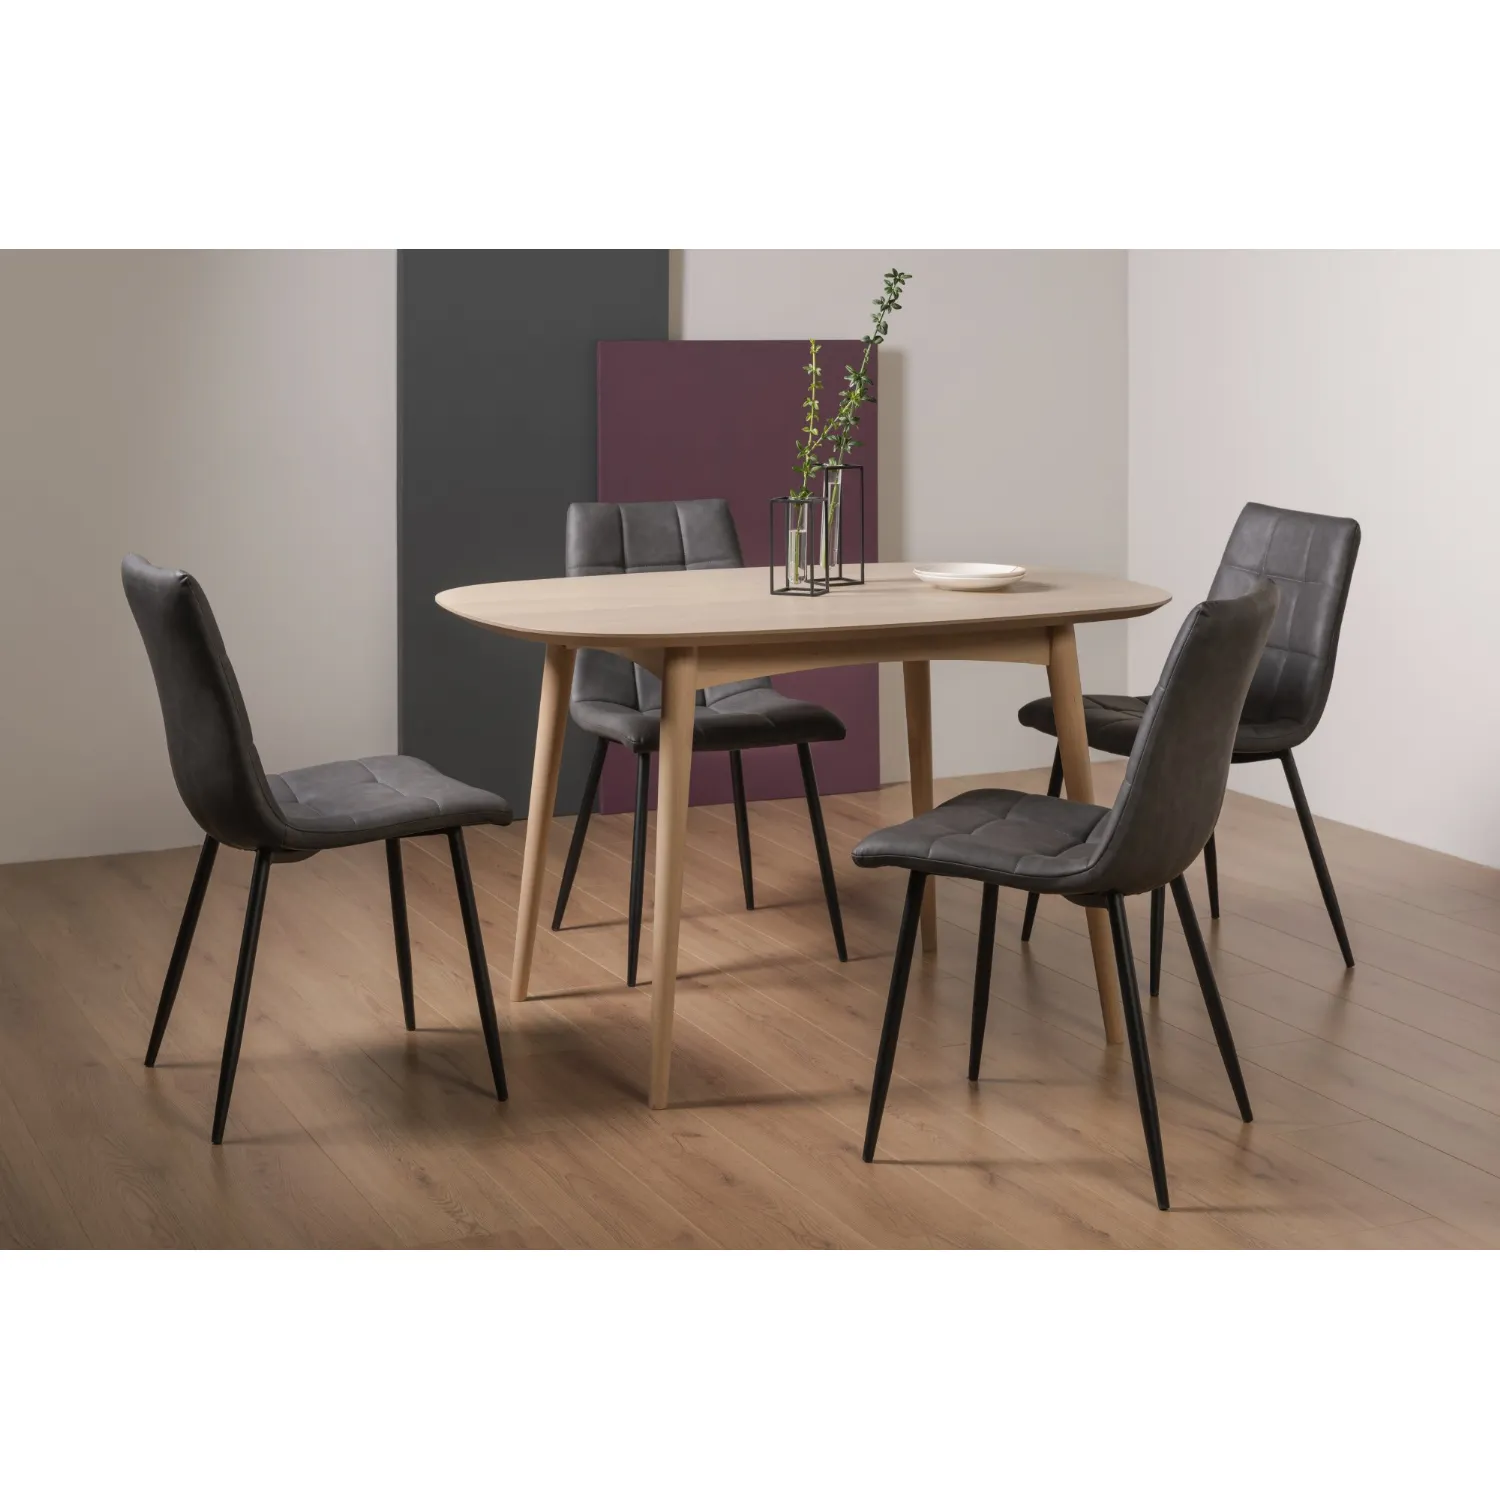 Oak Dining Table Set 4 Grey Leather Chairs